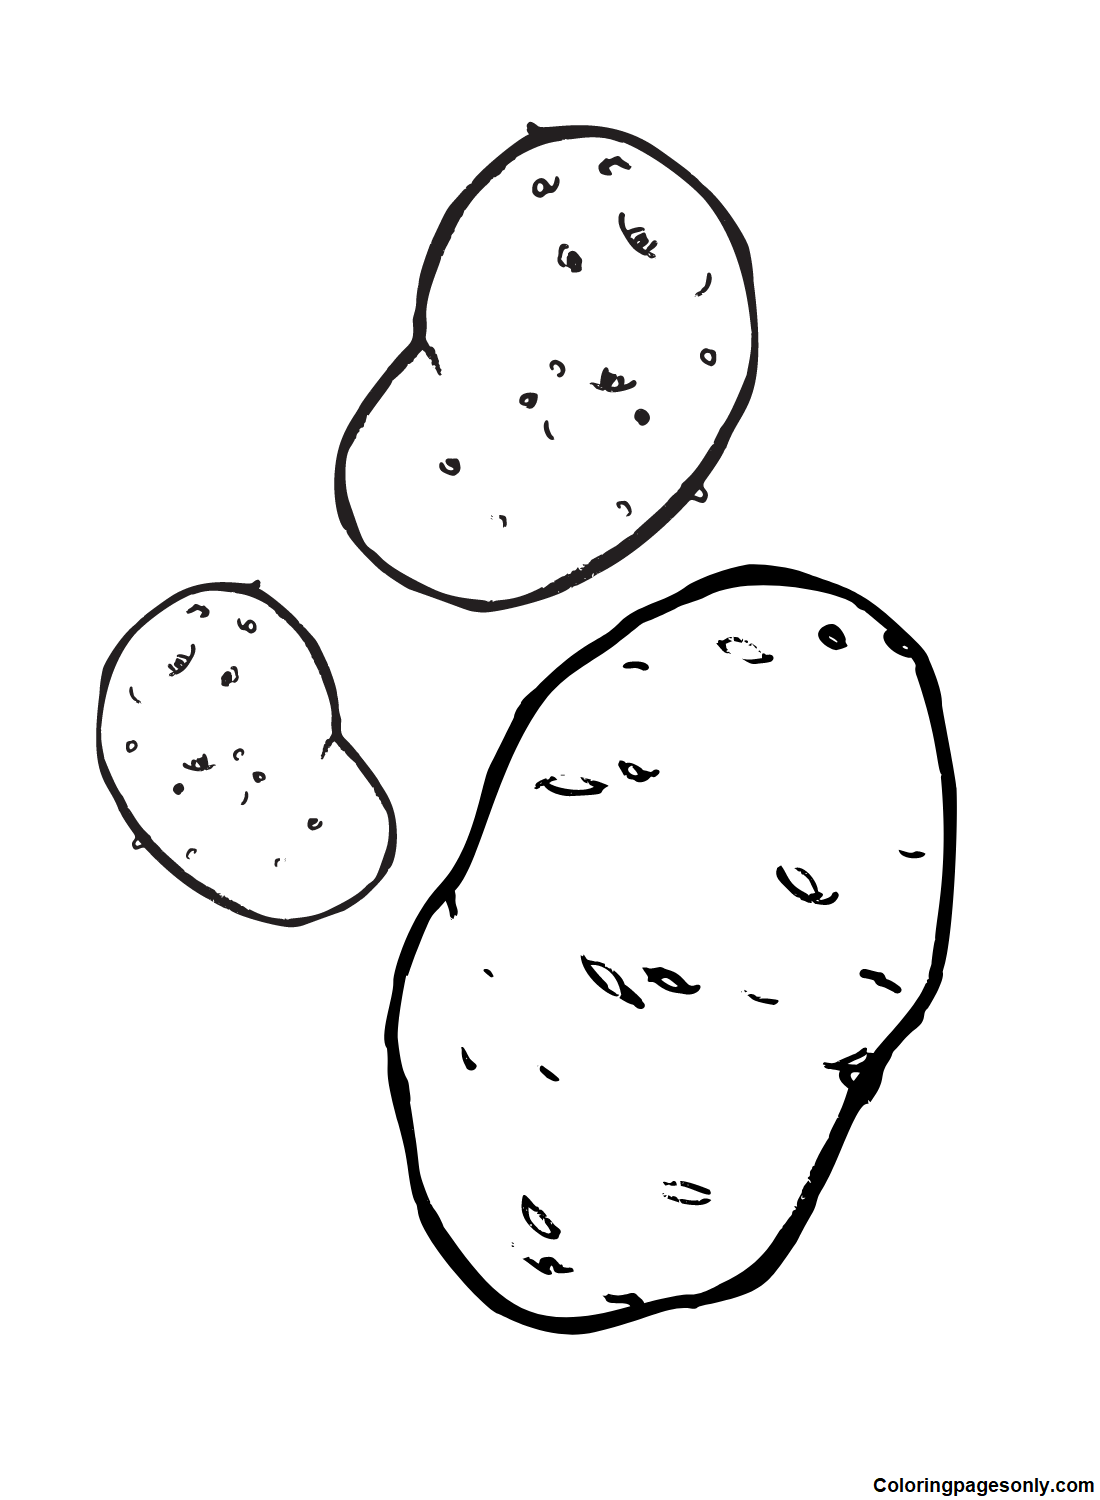 Green Potatoes Coloring Pages